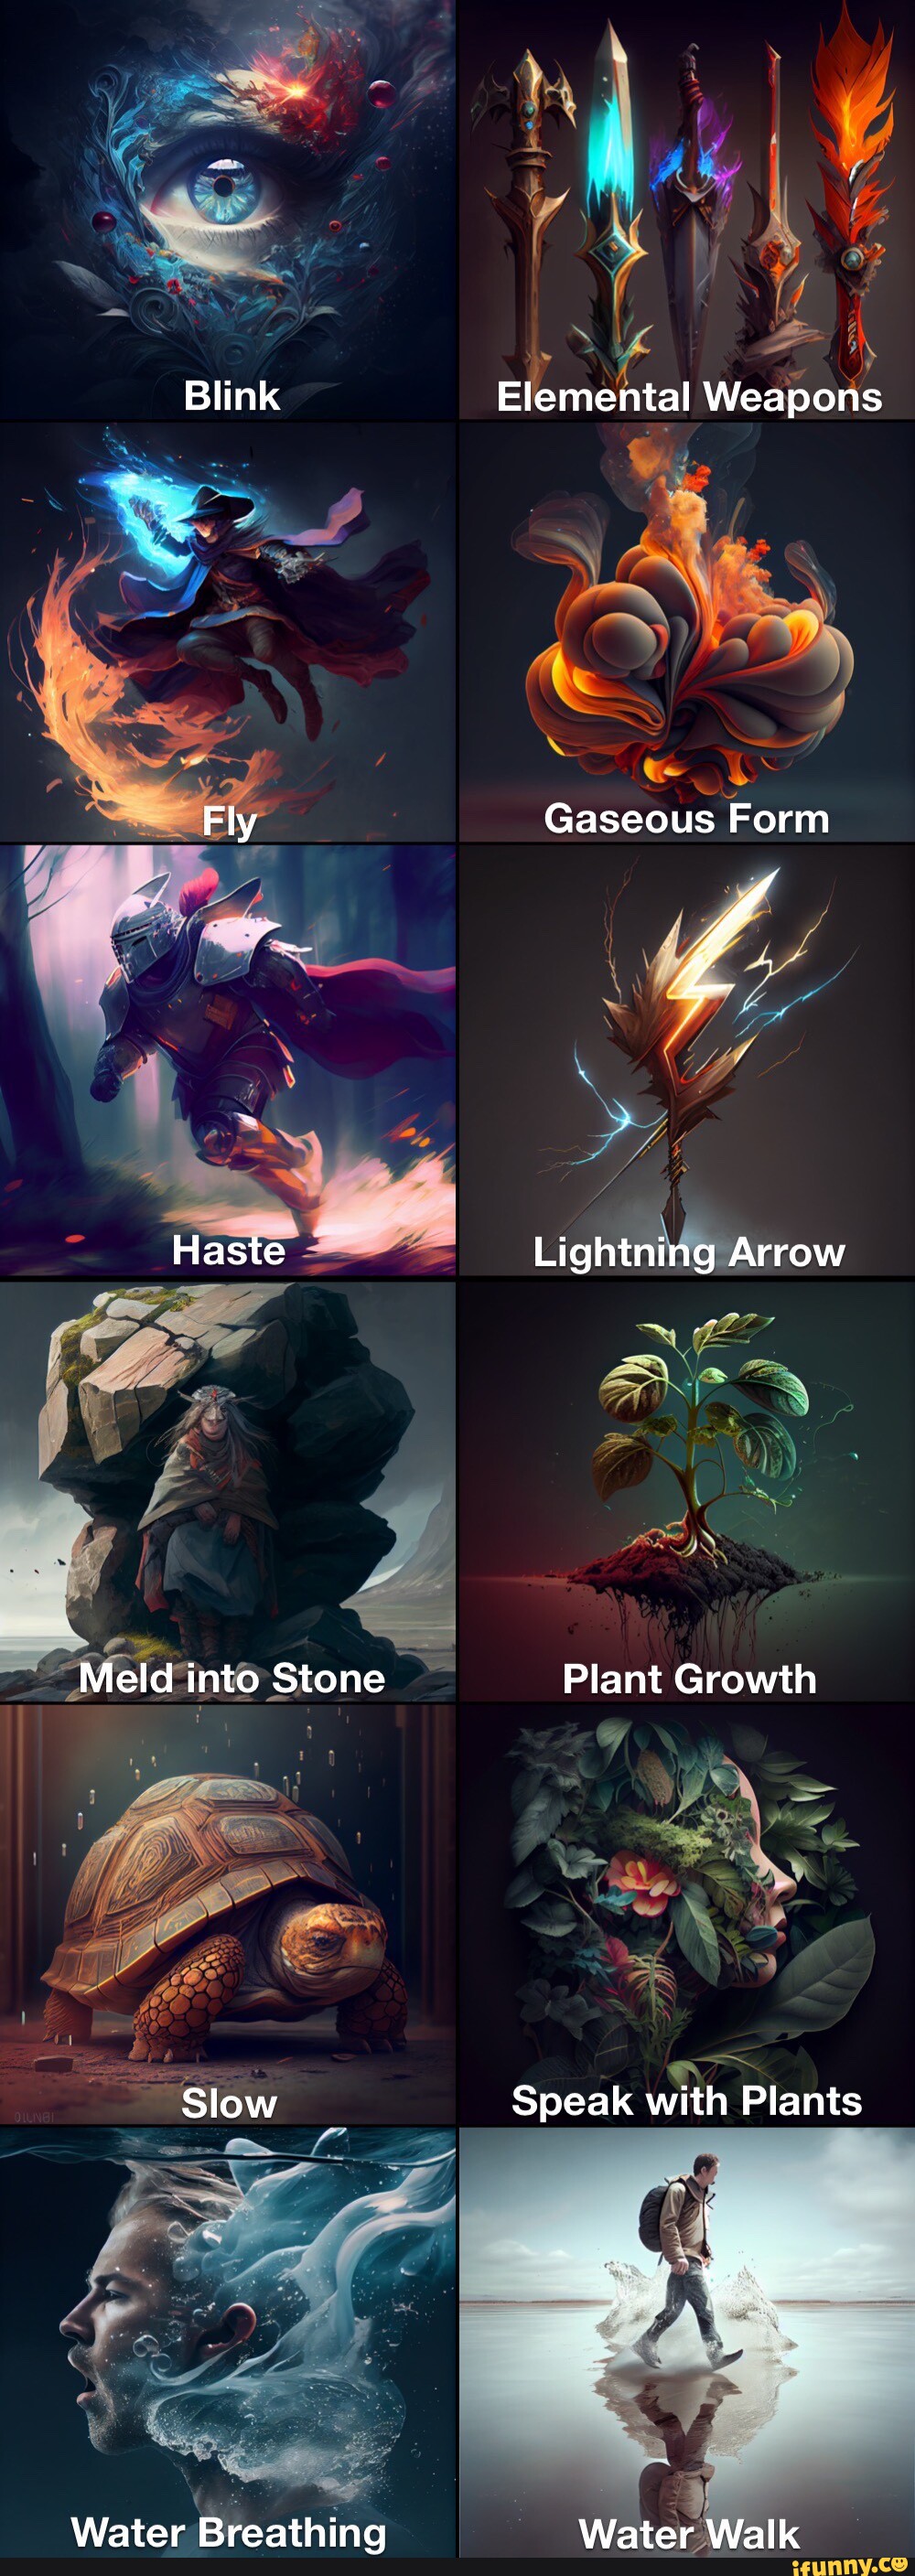 Blink Fly Haste Meld into Stone Slow Water Breathing Elemental Weapons  Gaseous Form MW, Lightning Arrow FOX Plant Growth Speak with Plants Water  Walk - iFunny